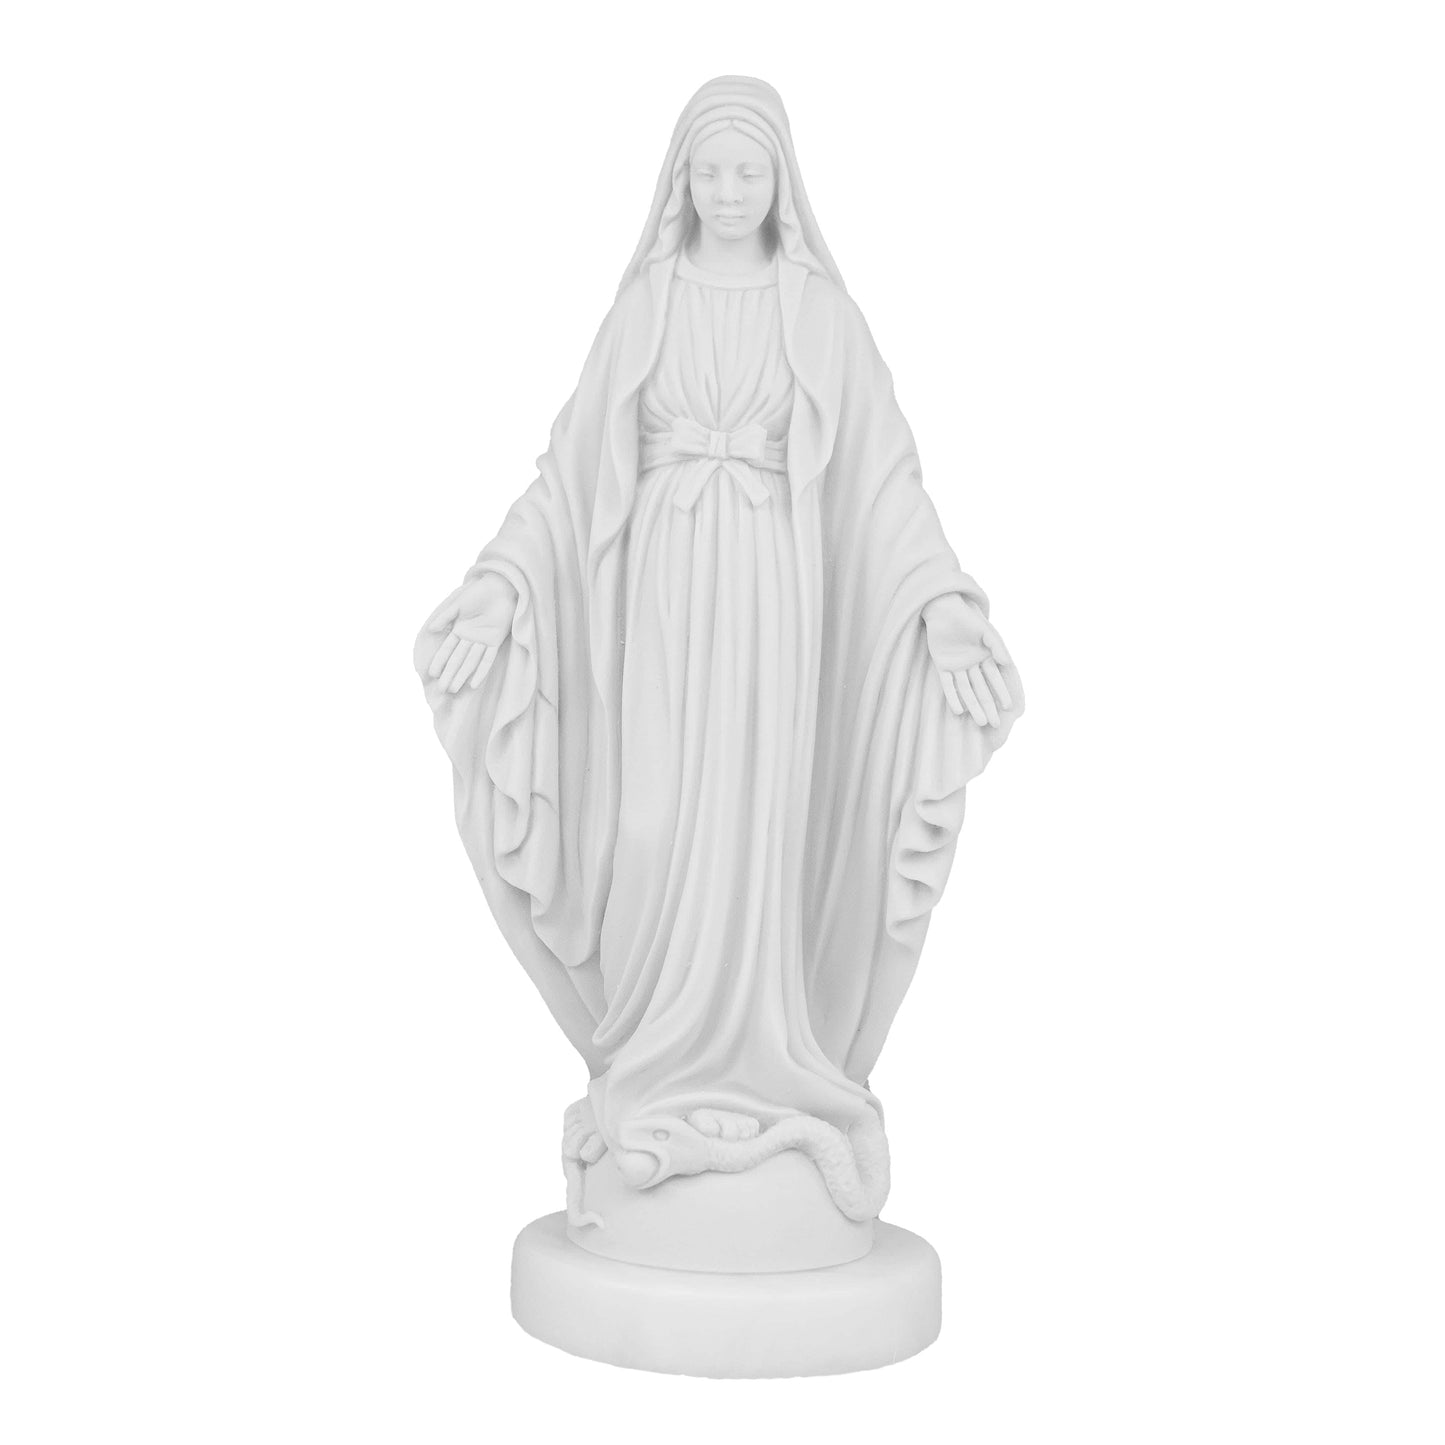 MONDO CATTOLICO 25 cm White Marble Dust Statue of Miraculous Mary